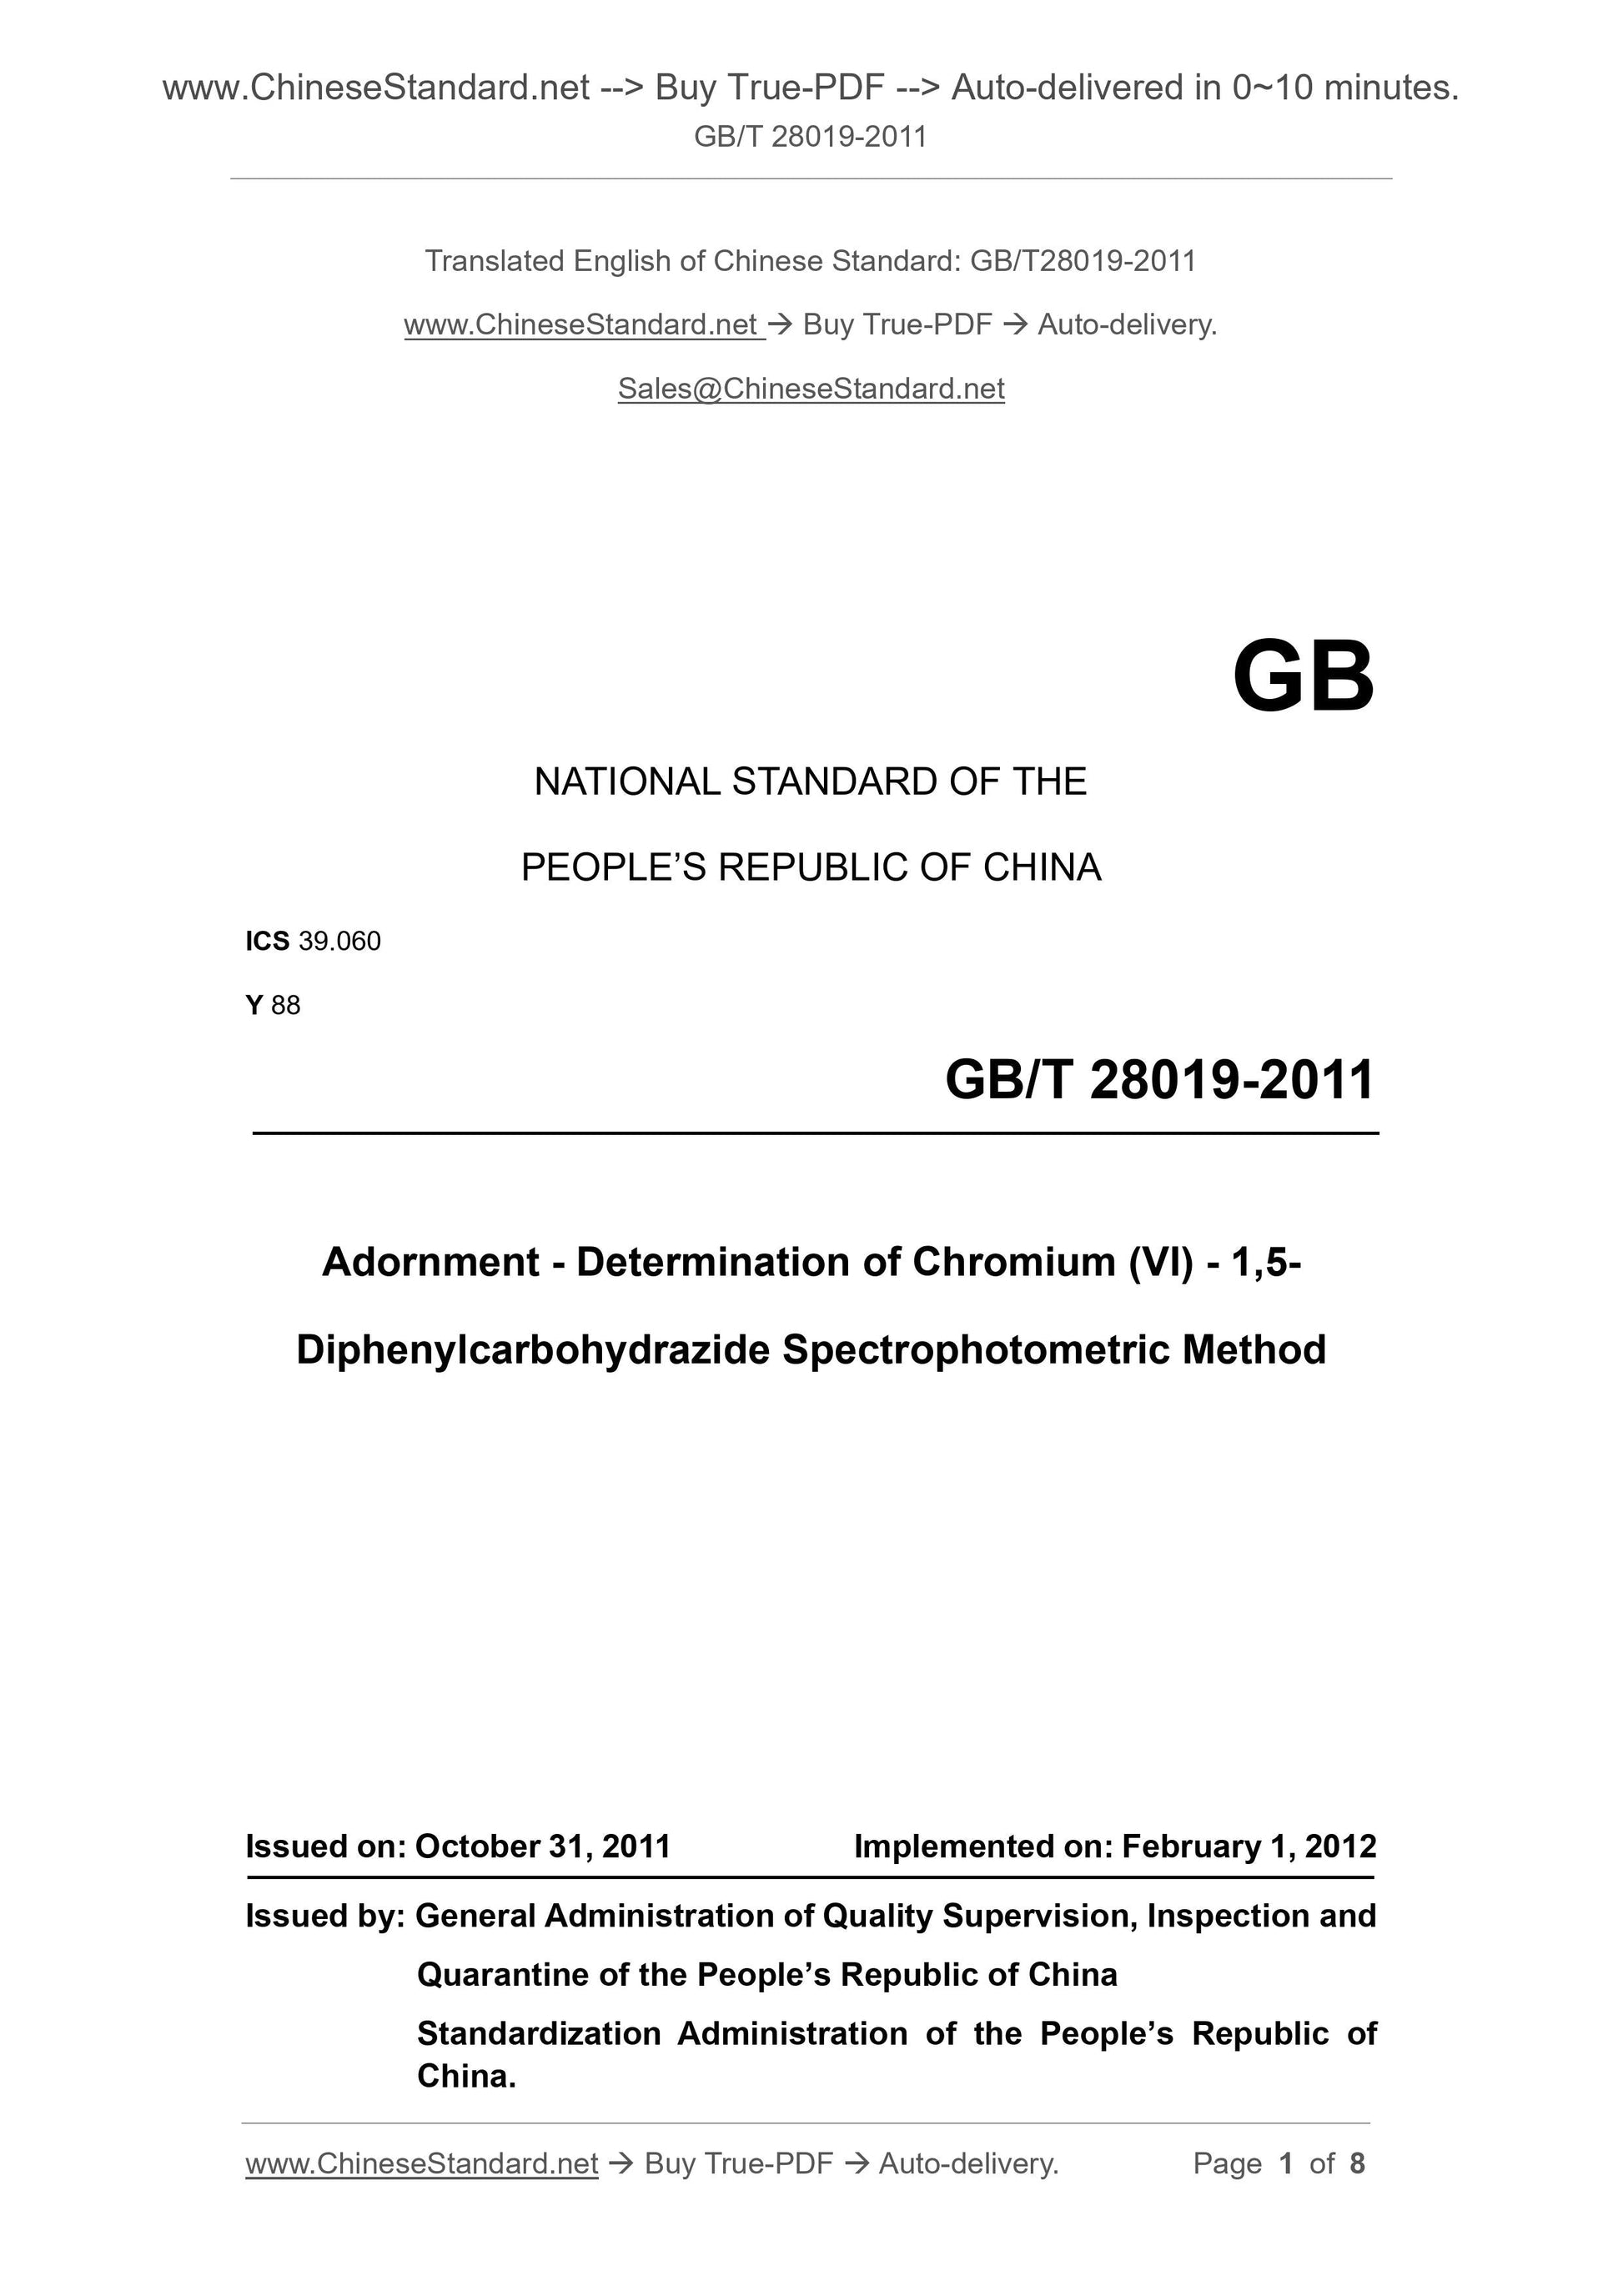 GB/T 28019-2011 Page 1